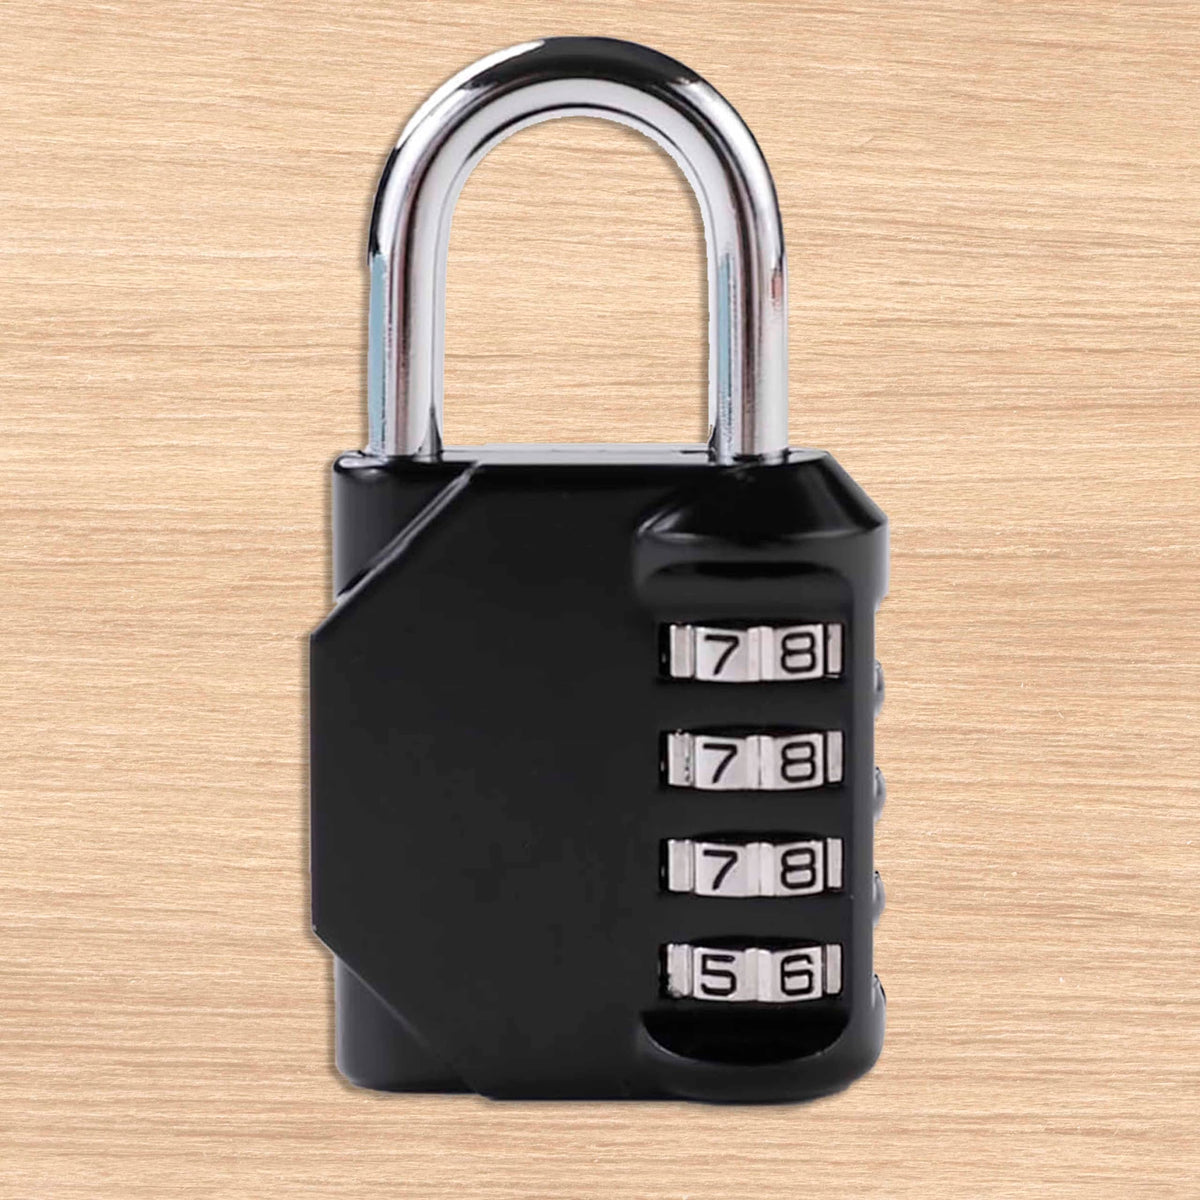 Urbane Home 4 Digit Combination Lock | Travel Lock for Briefcase | Number Lock | Padlock for Luggage | Travelling Locks for Suitcase | Gym Lock | 8023ABK | Black